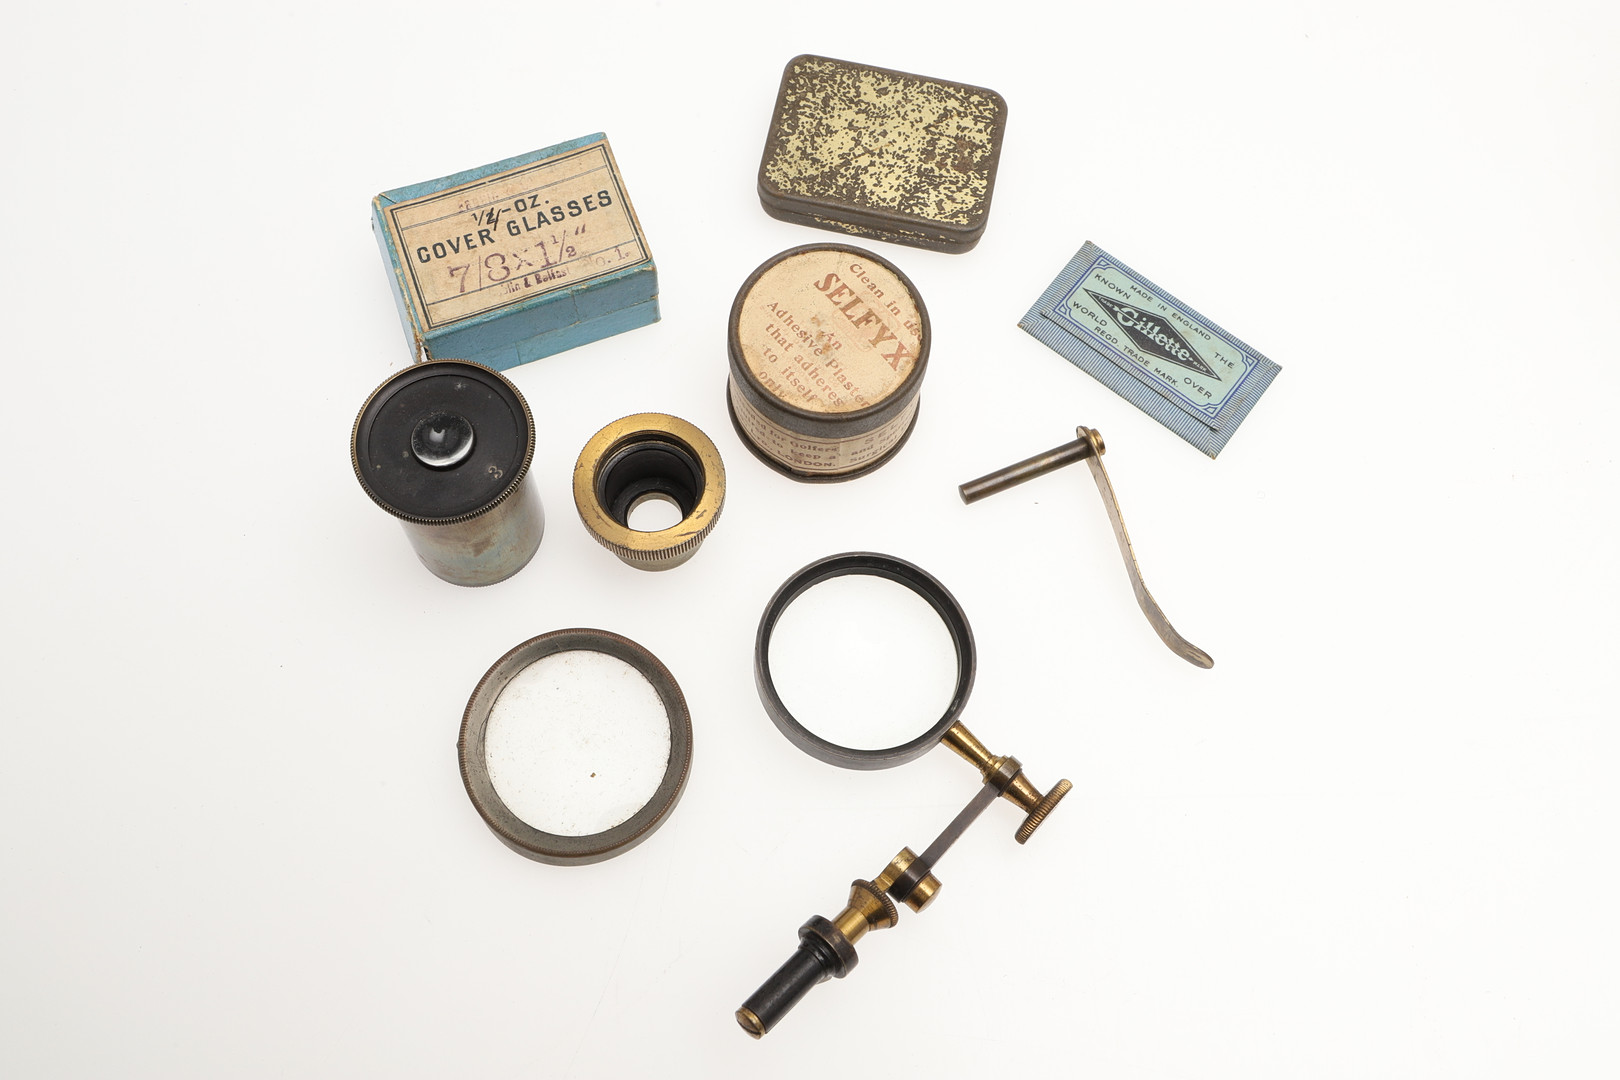 CONSTANT VERICK. A FRENCH LATE 19TH CENTURY CASED MICROSCOPE. - Image 11 of 18